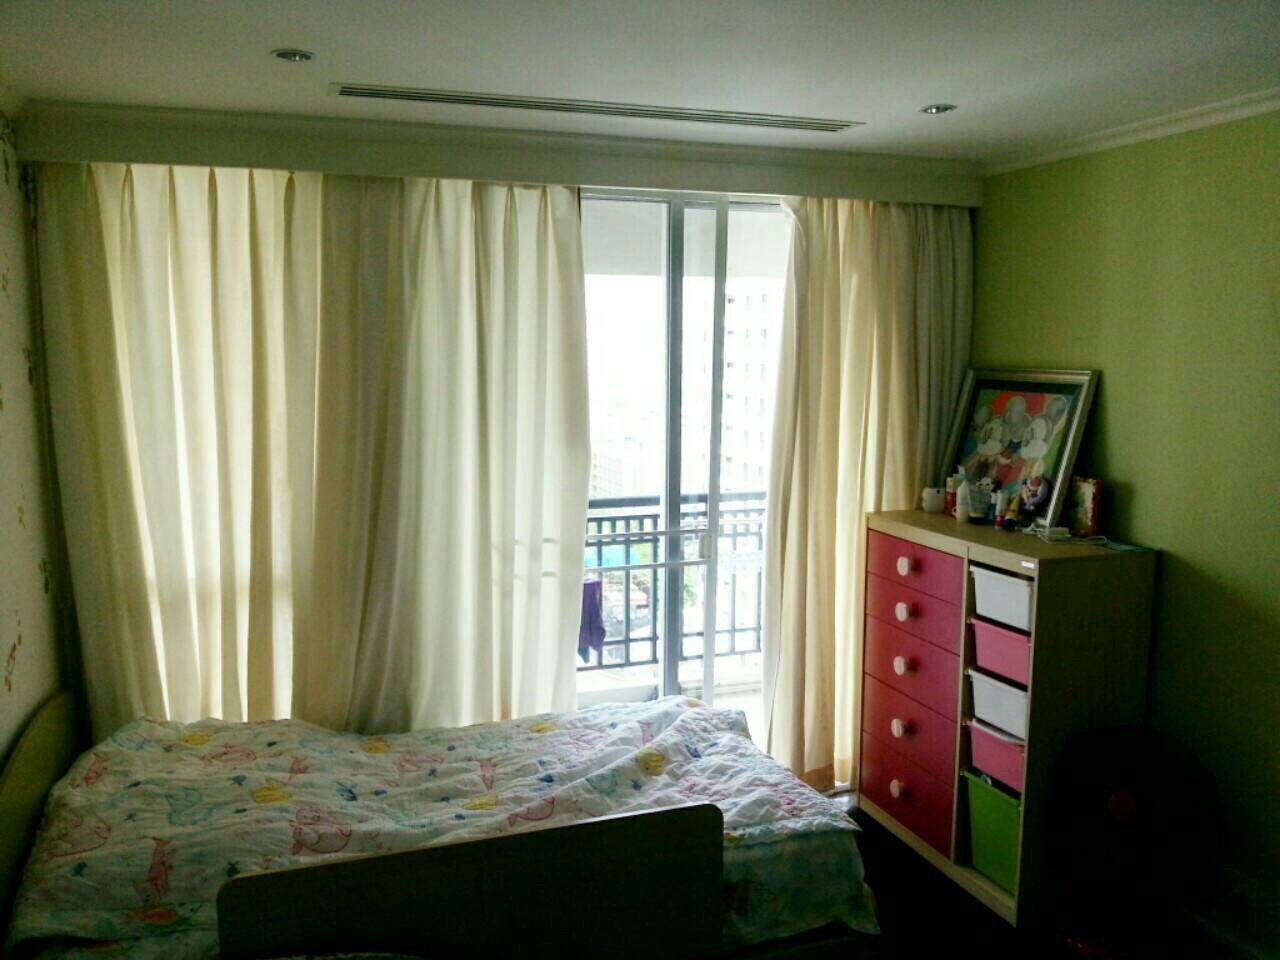 Condo for sell in Sukhumvit 11 3bed 230sqm<br />
fully furnished 1 study 1maid